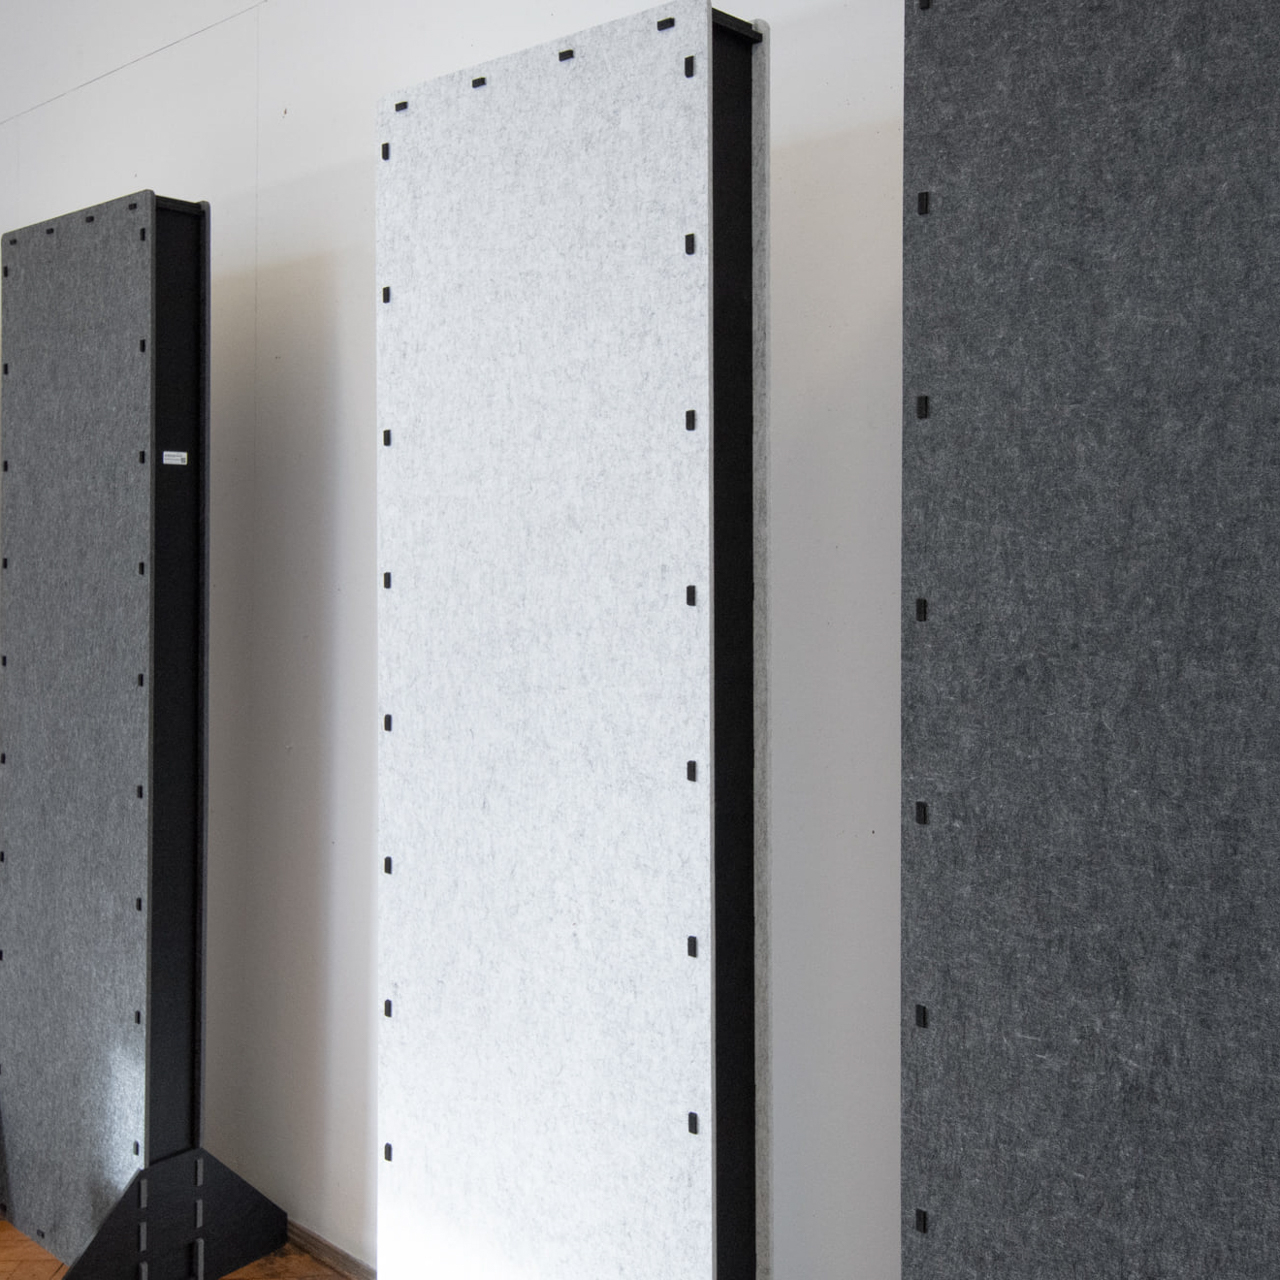 Freestanding sound absorbing acoustic partitions placed against the wall in the lecture room at the Academy of Fine Arts in Krakow to reduce noise and reverberation.